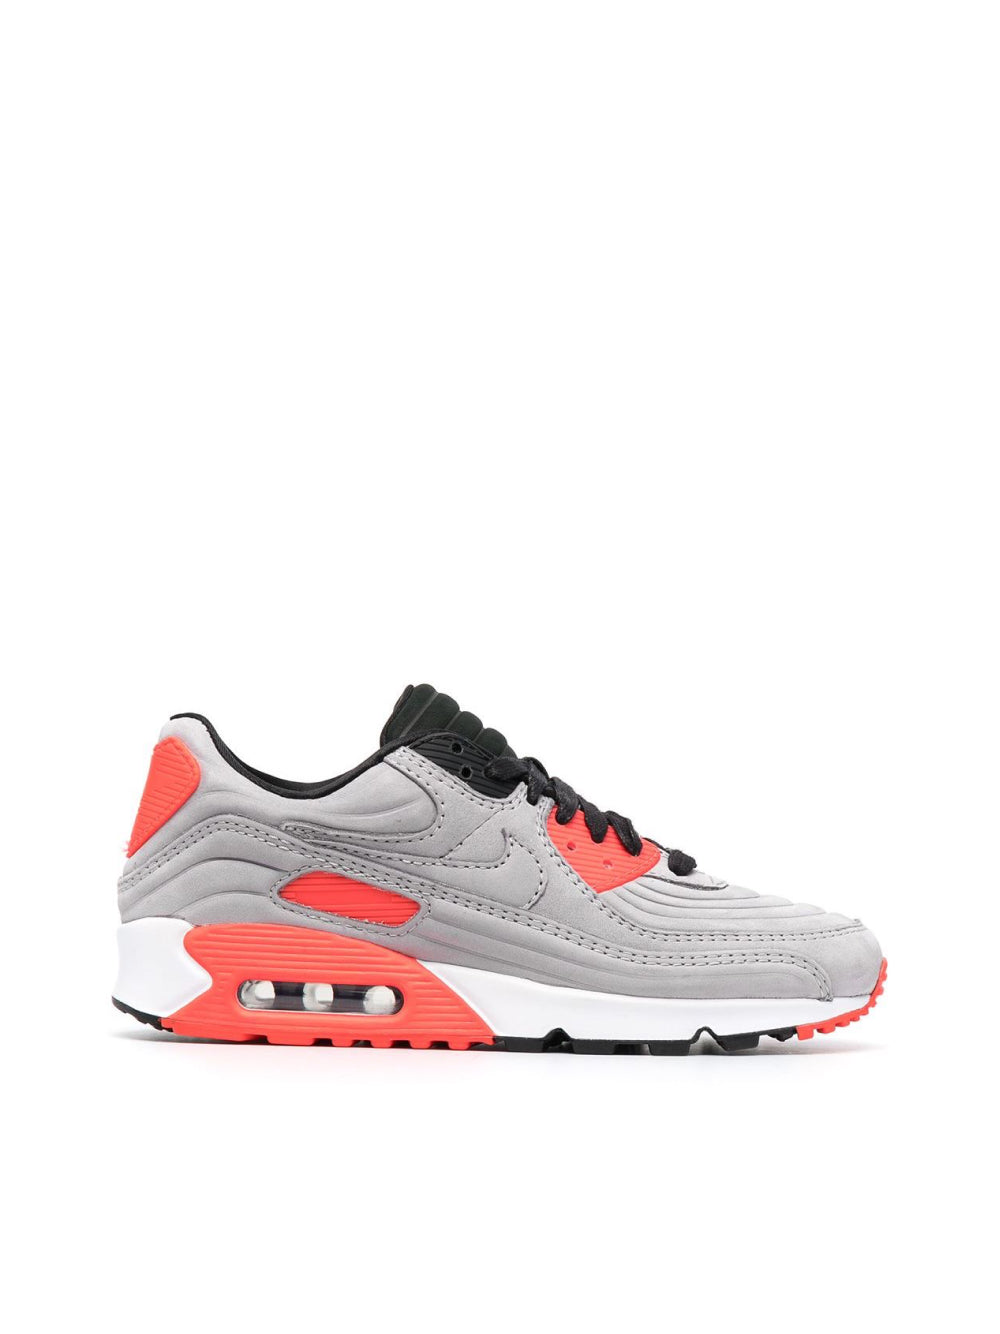 Nike-OUTLET-SALE-Air Max 90 QS Low Top Sneakers-ARCHIVIST